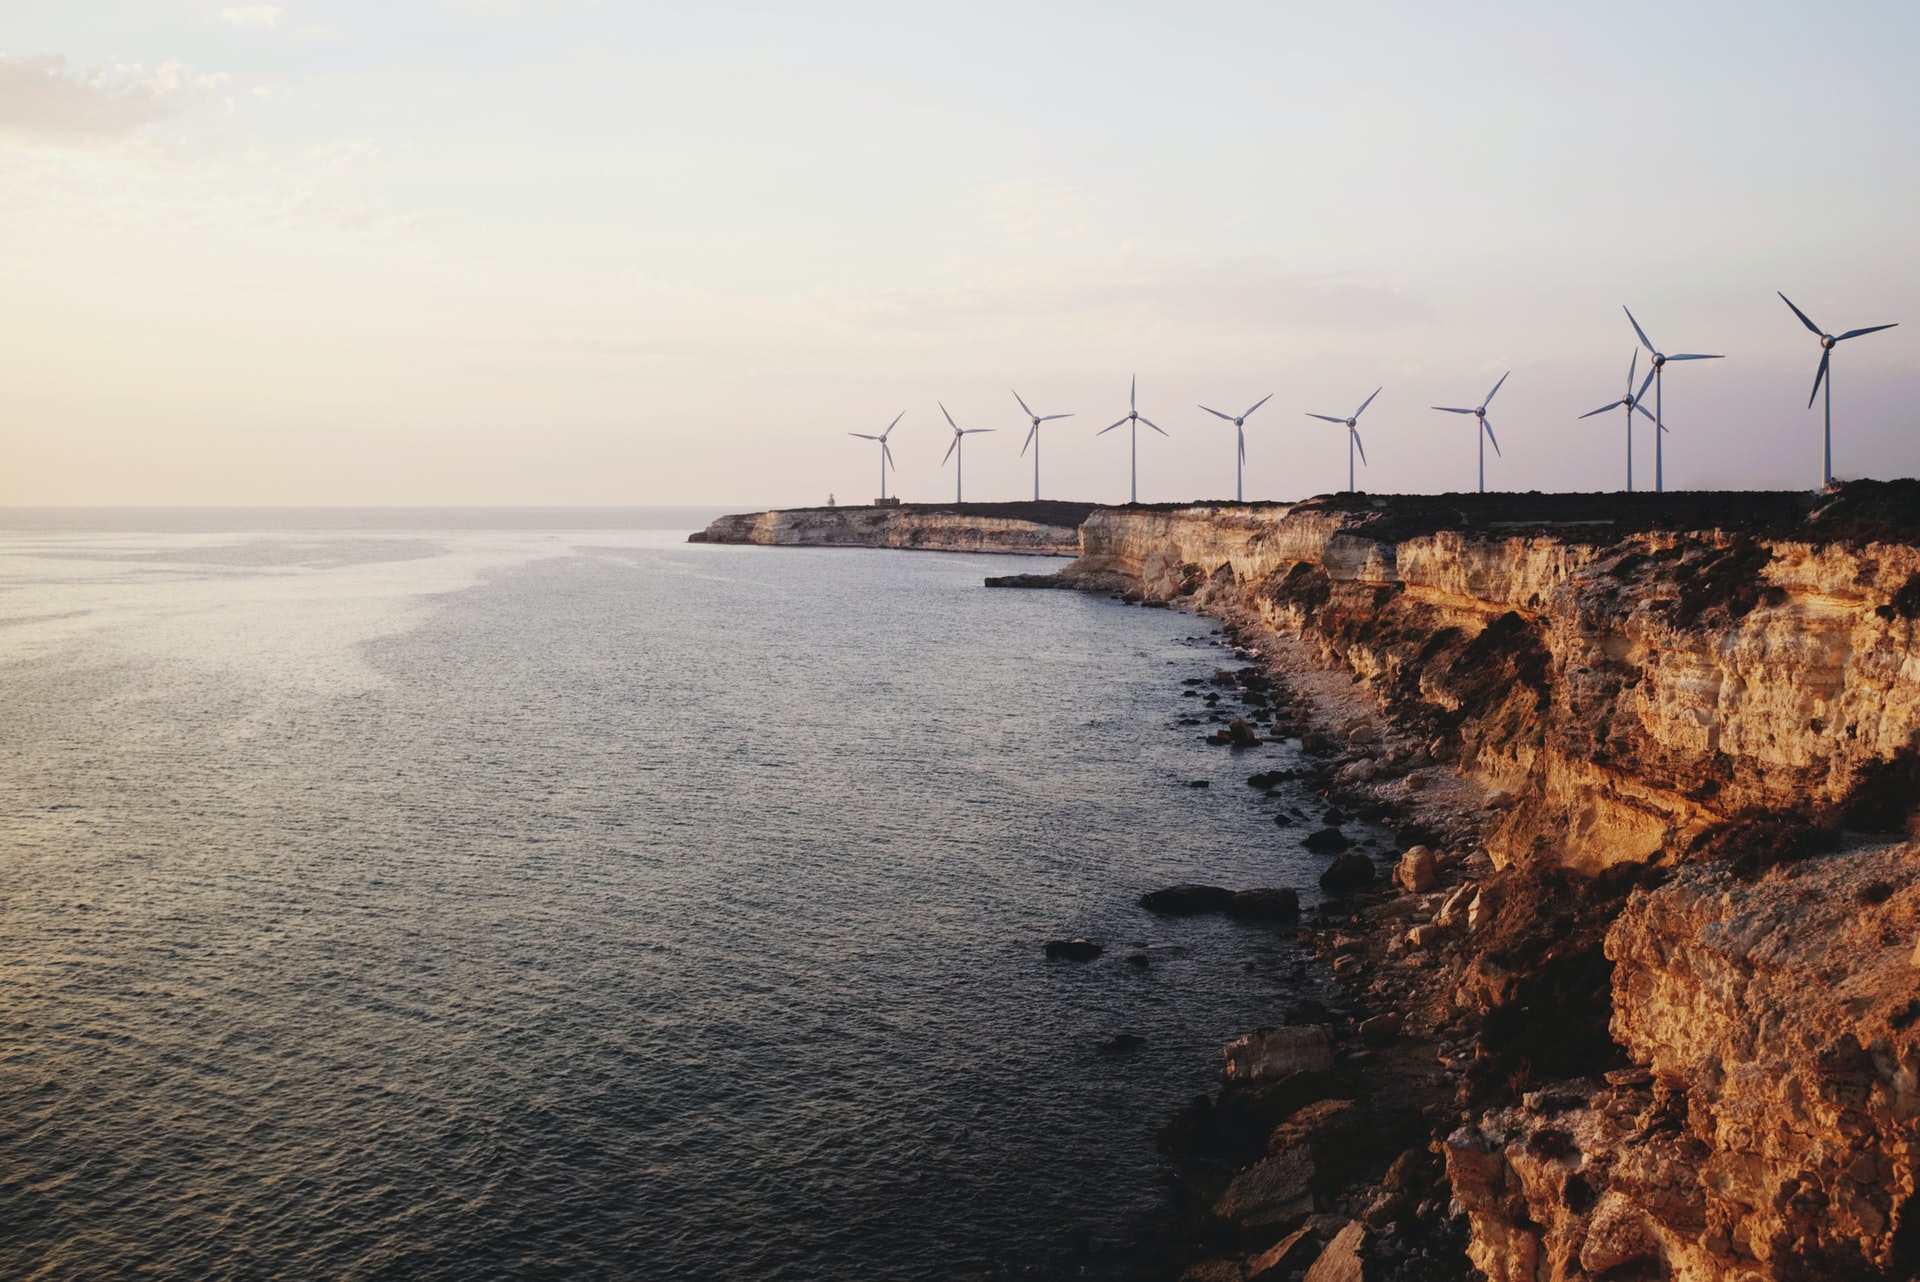 Wind Energy Output Surges to Record Across Europe, US Offshore Wind Auction Rakes in Billions